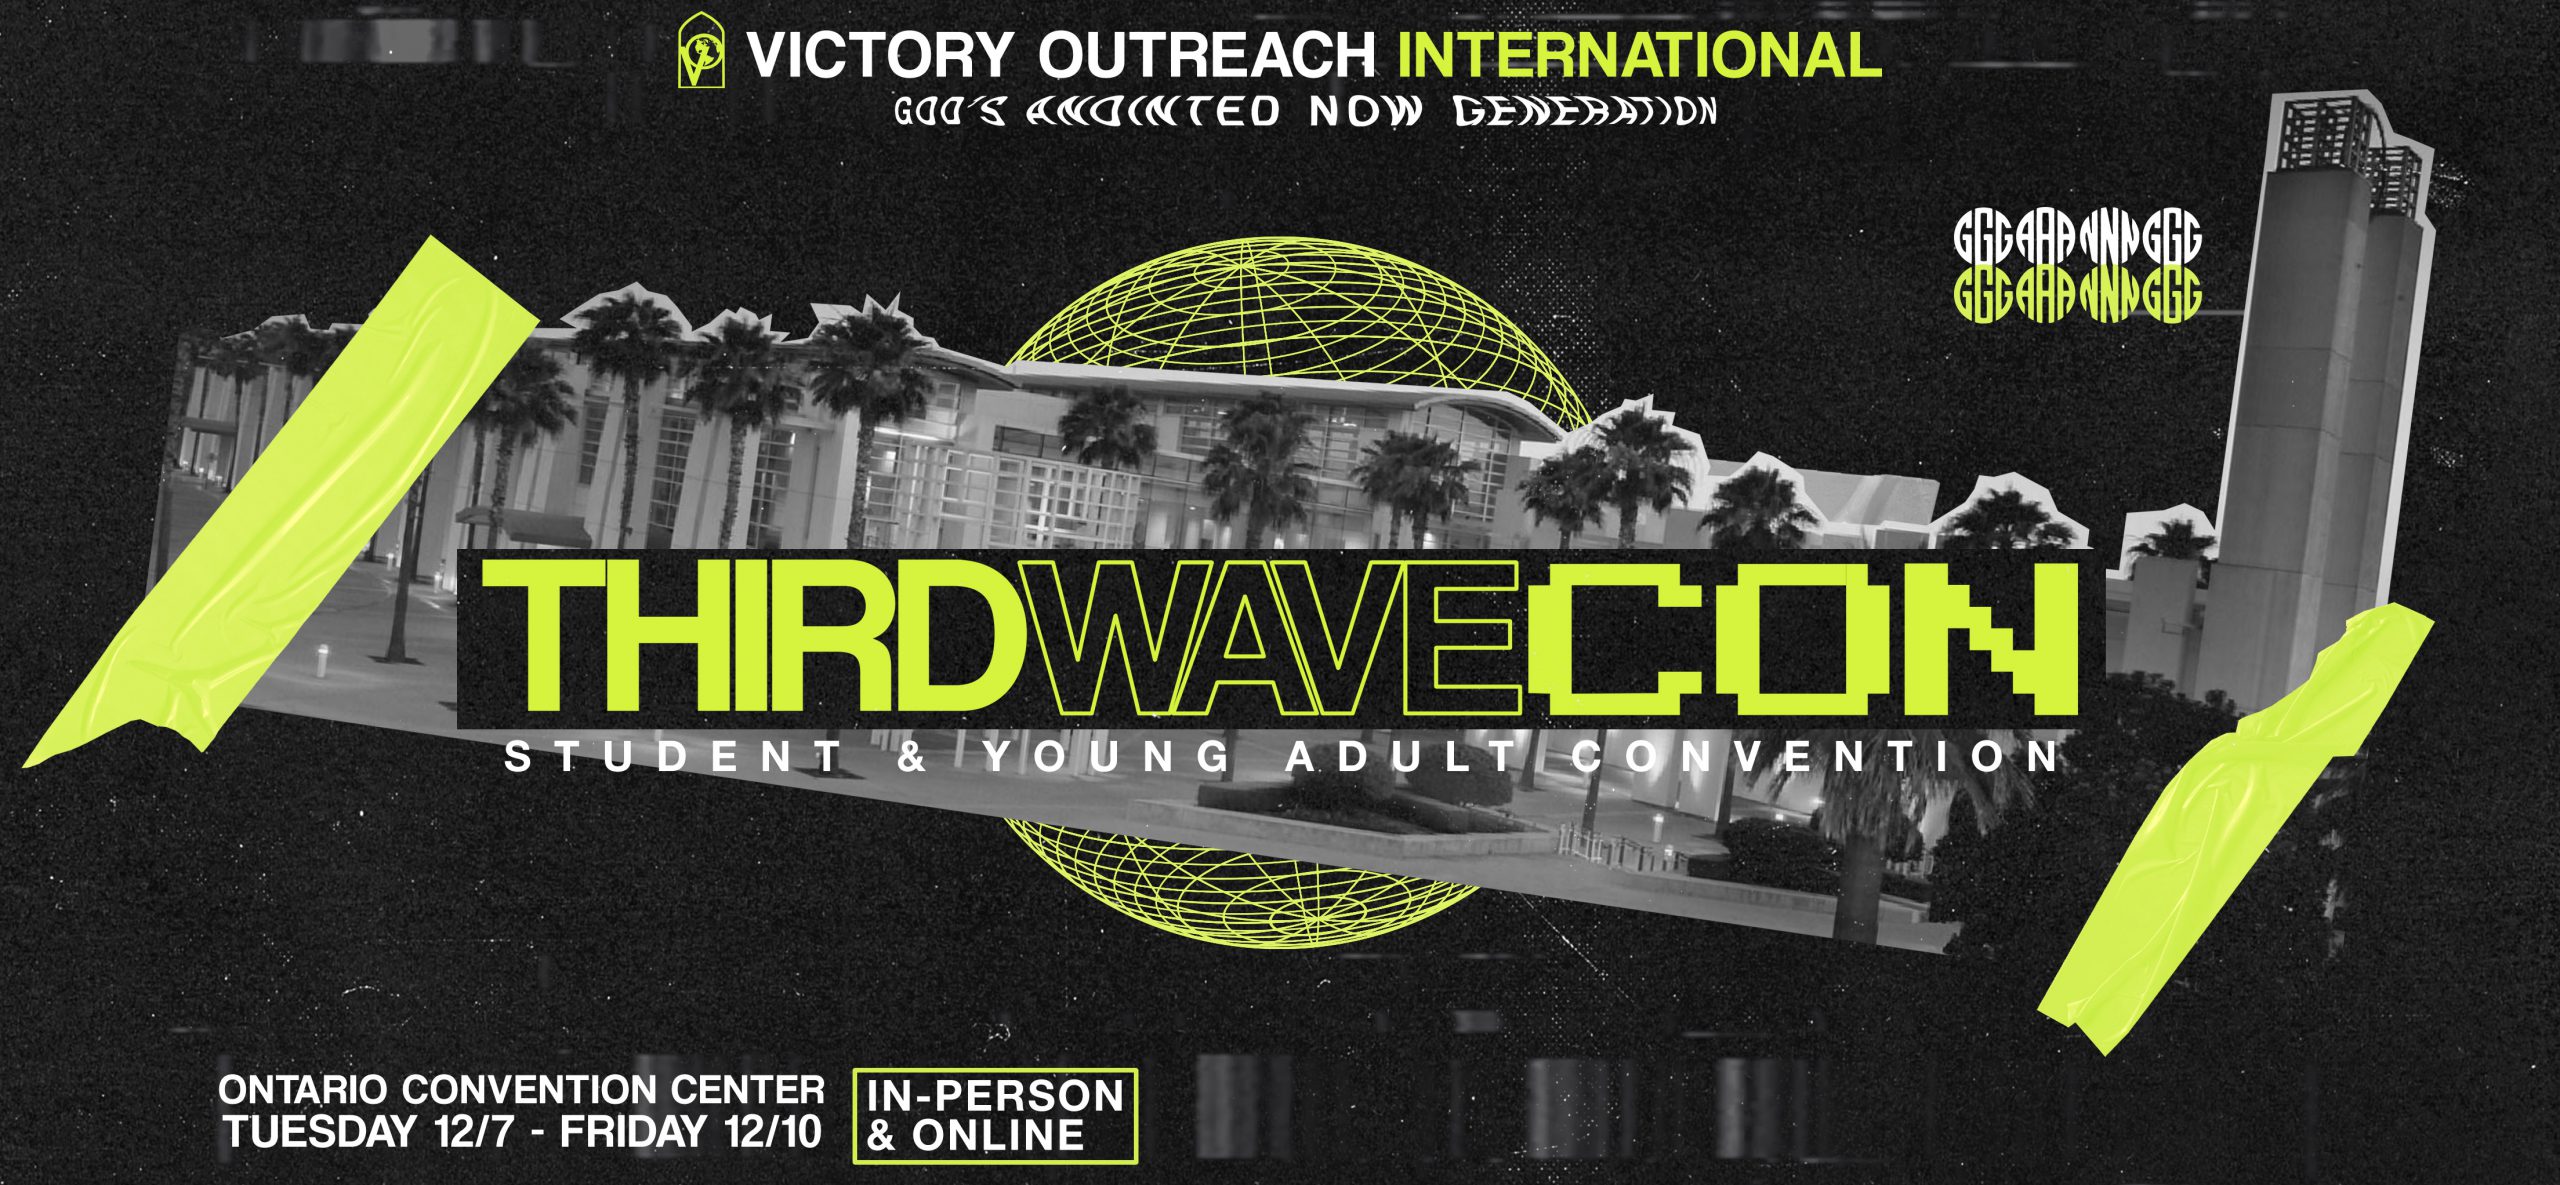 Victory Outreach International Reaching The Cities Of The World